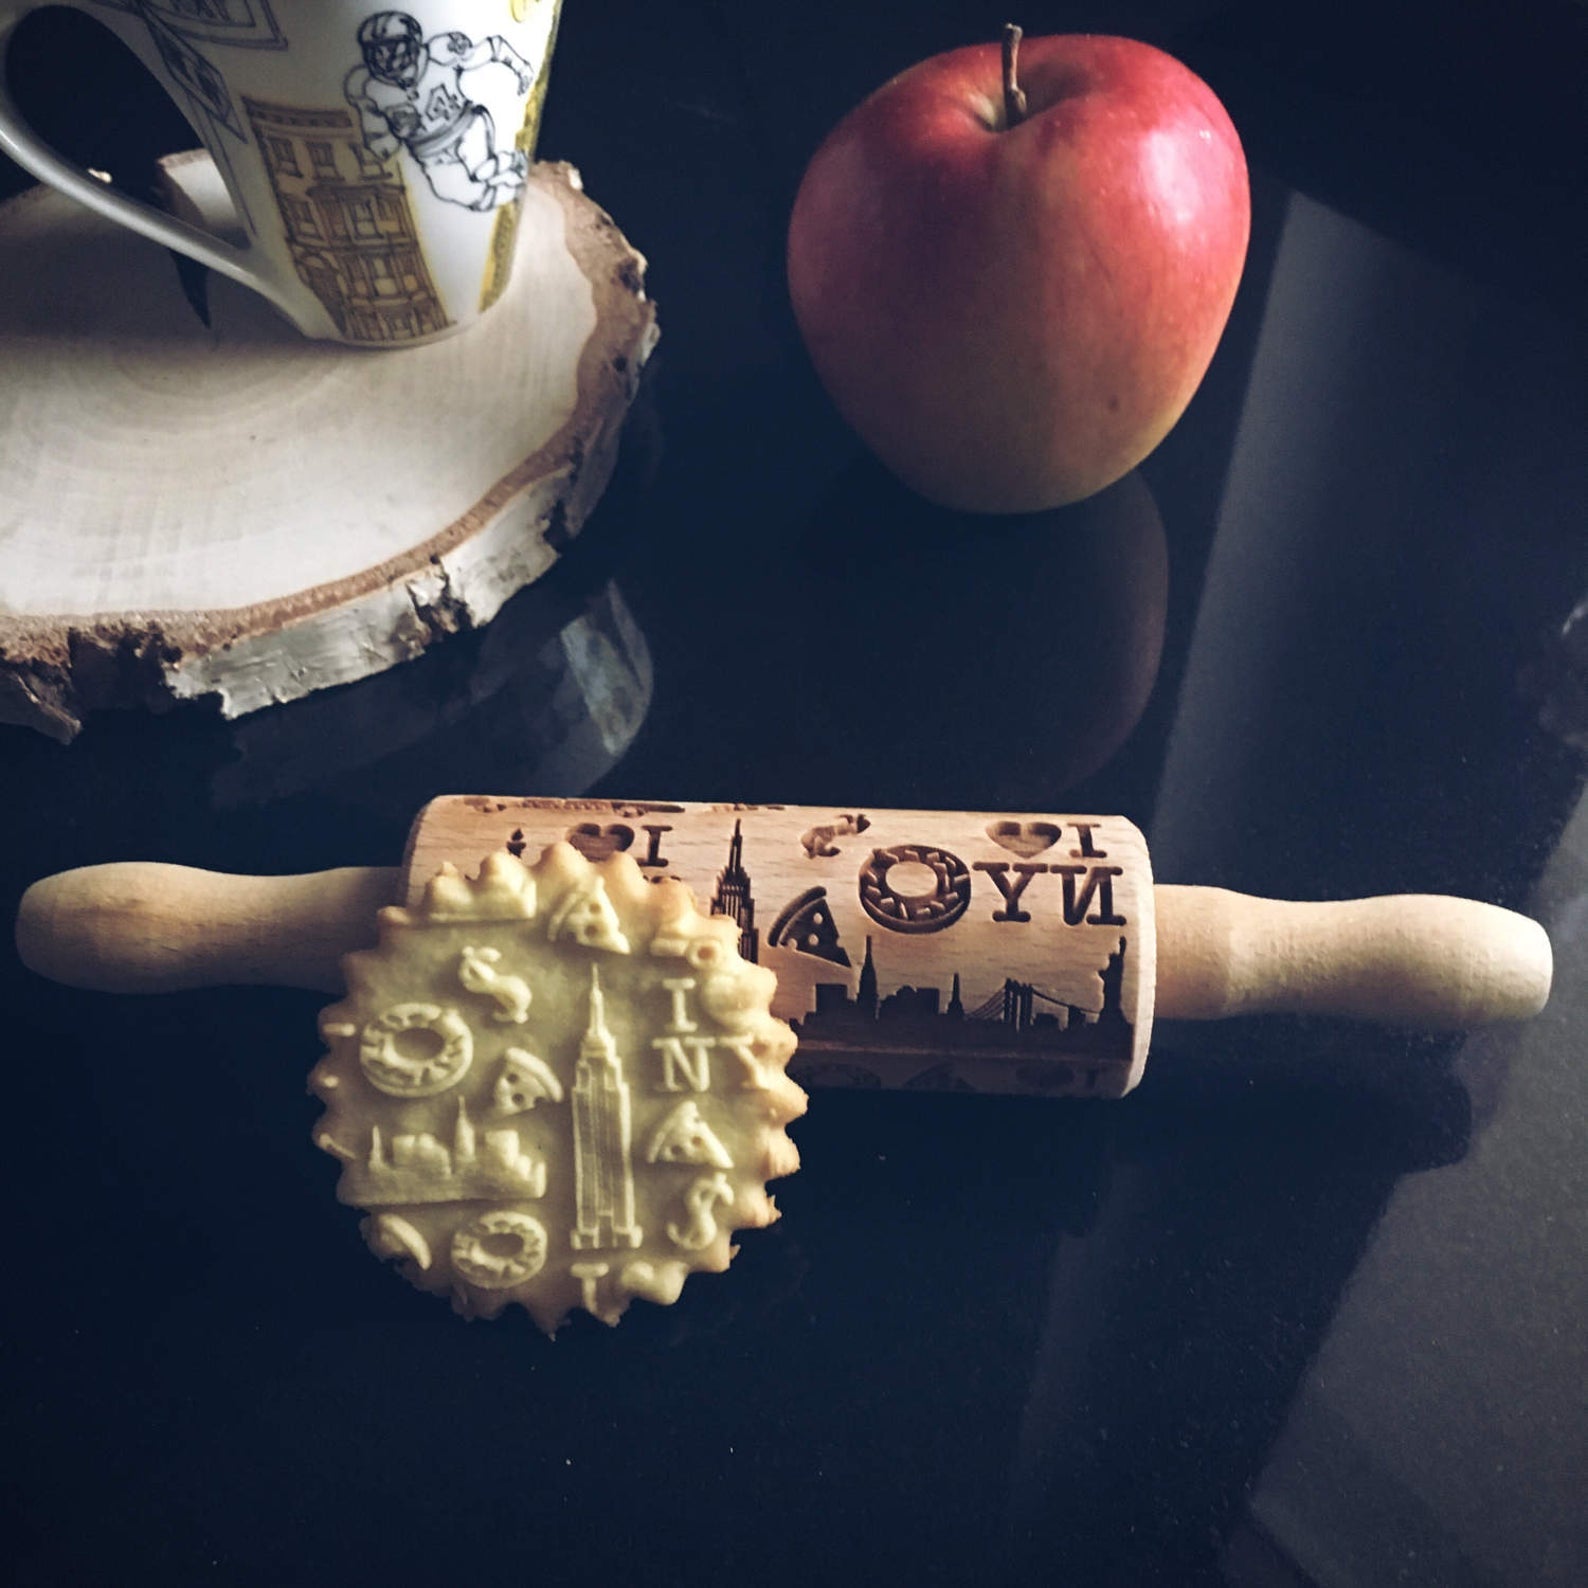 NEW YORK KIDS ROLLING PIN - pastrymade